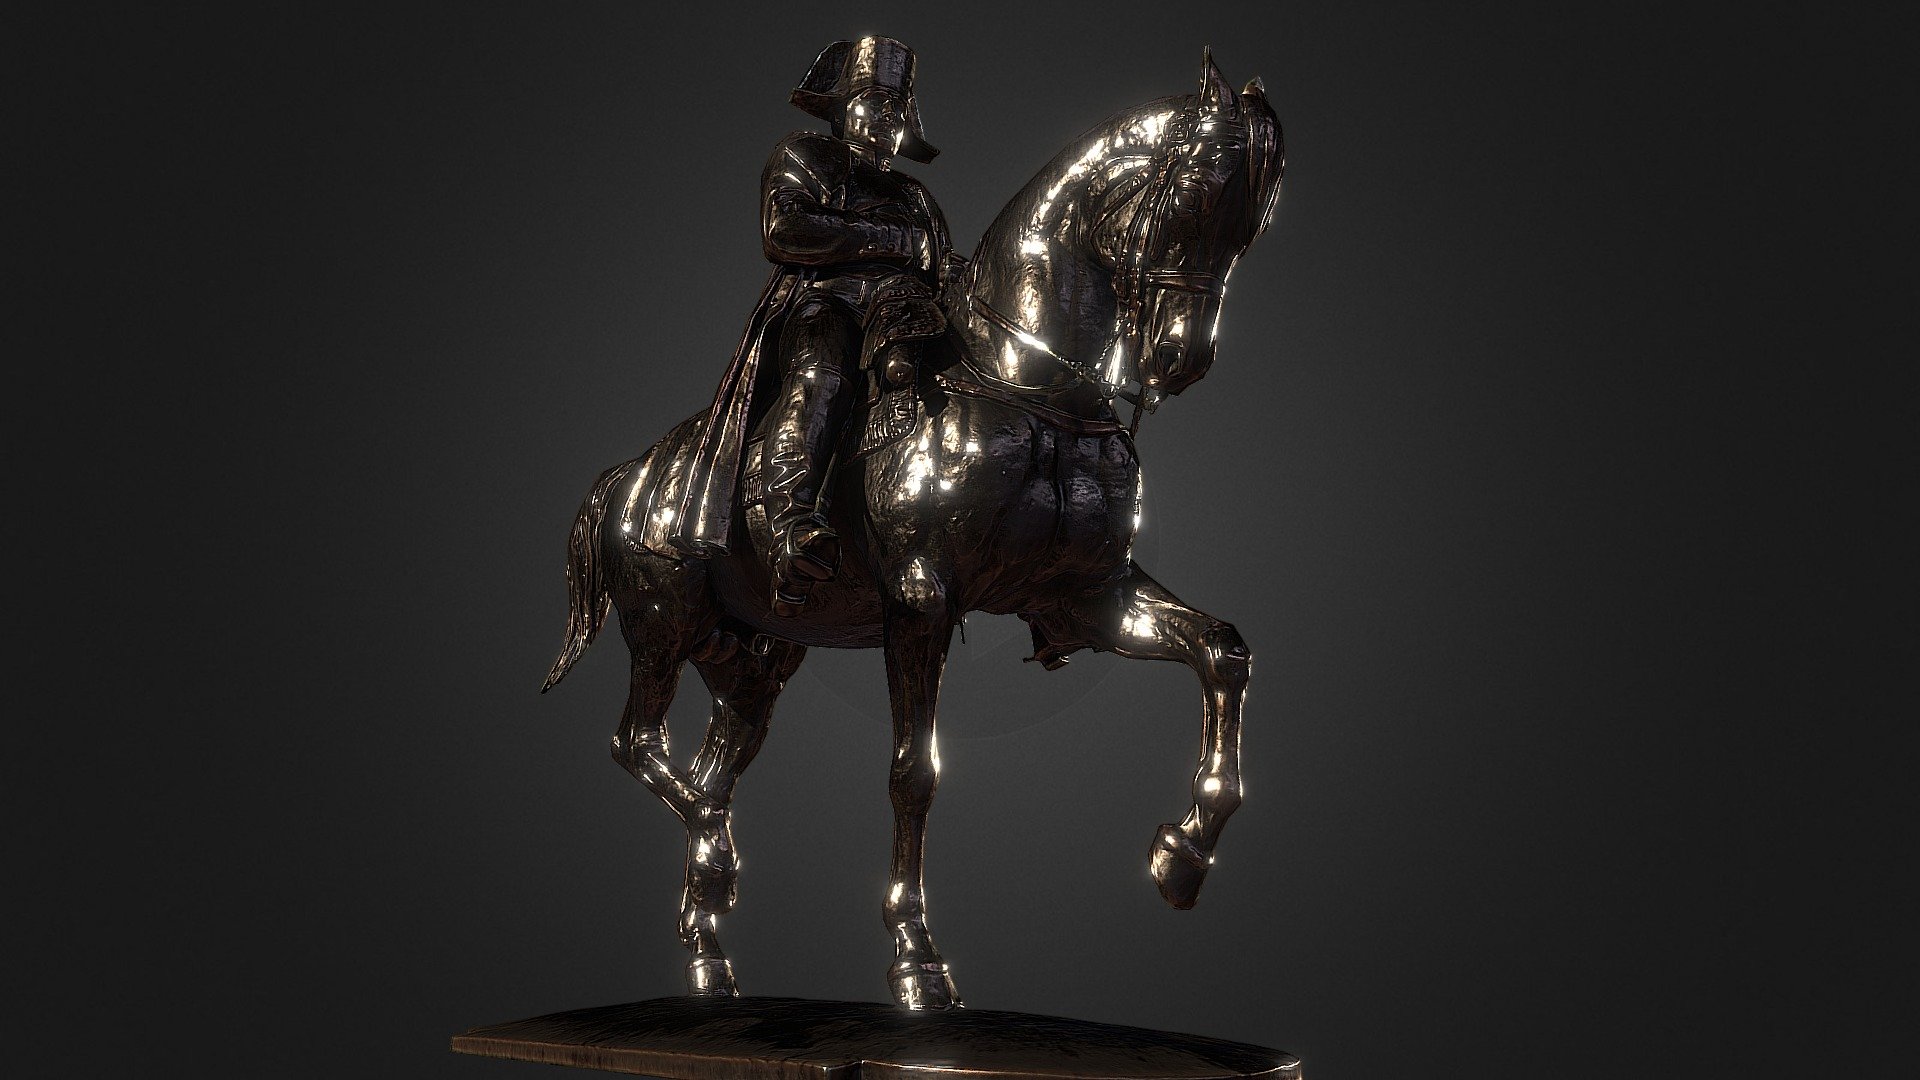 Low poly model of Statue of Napoleon on Horse. 

Equestrian statue of Napoleon, 1868, located since 1930 in Laffrey (a village south of Grenoble (Isre, french Alps) in a place named &ldquo;prairie de la Rencontre